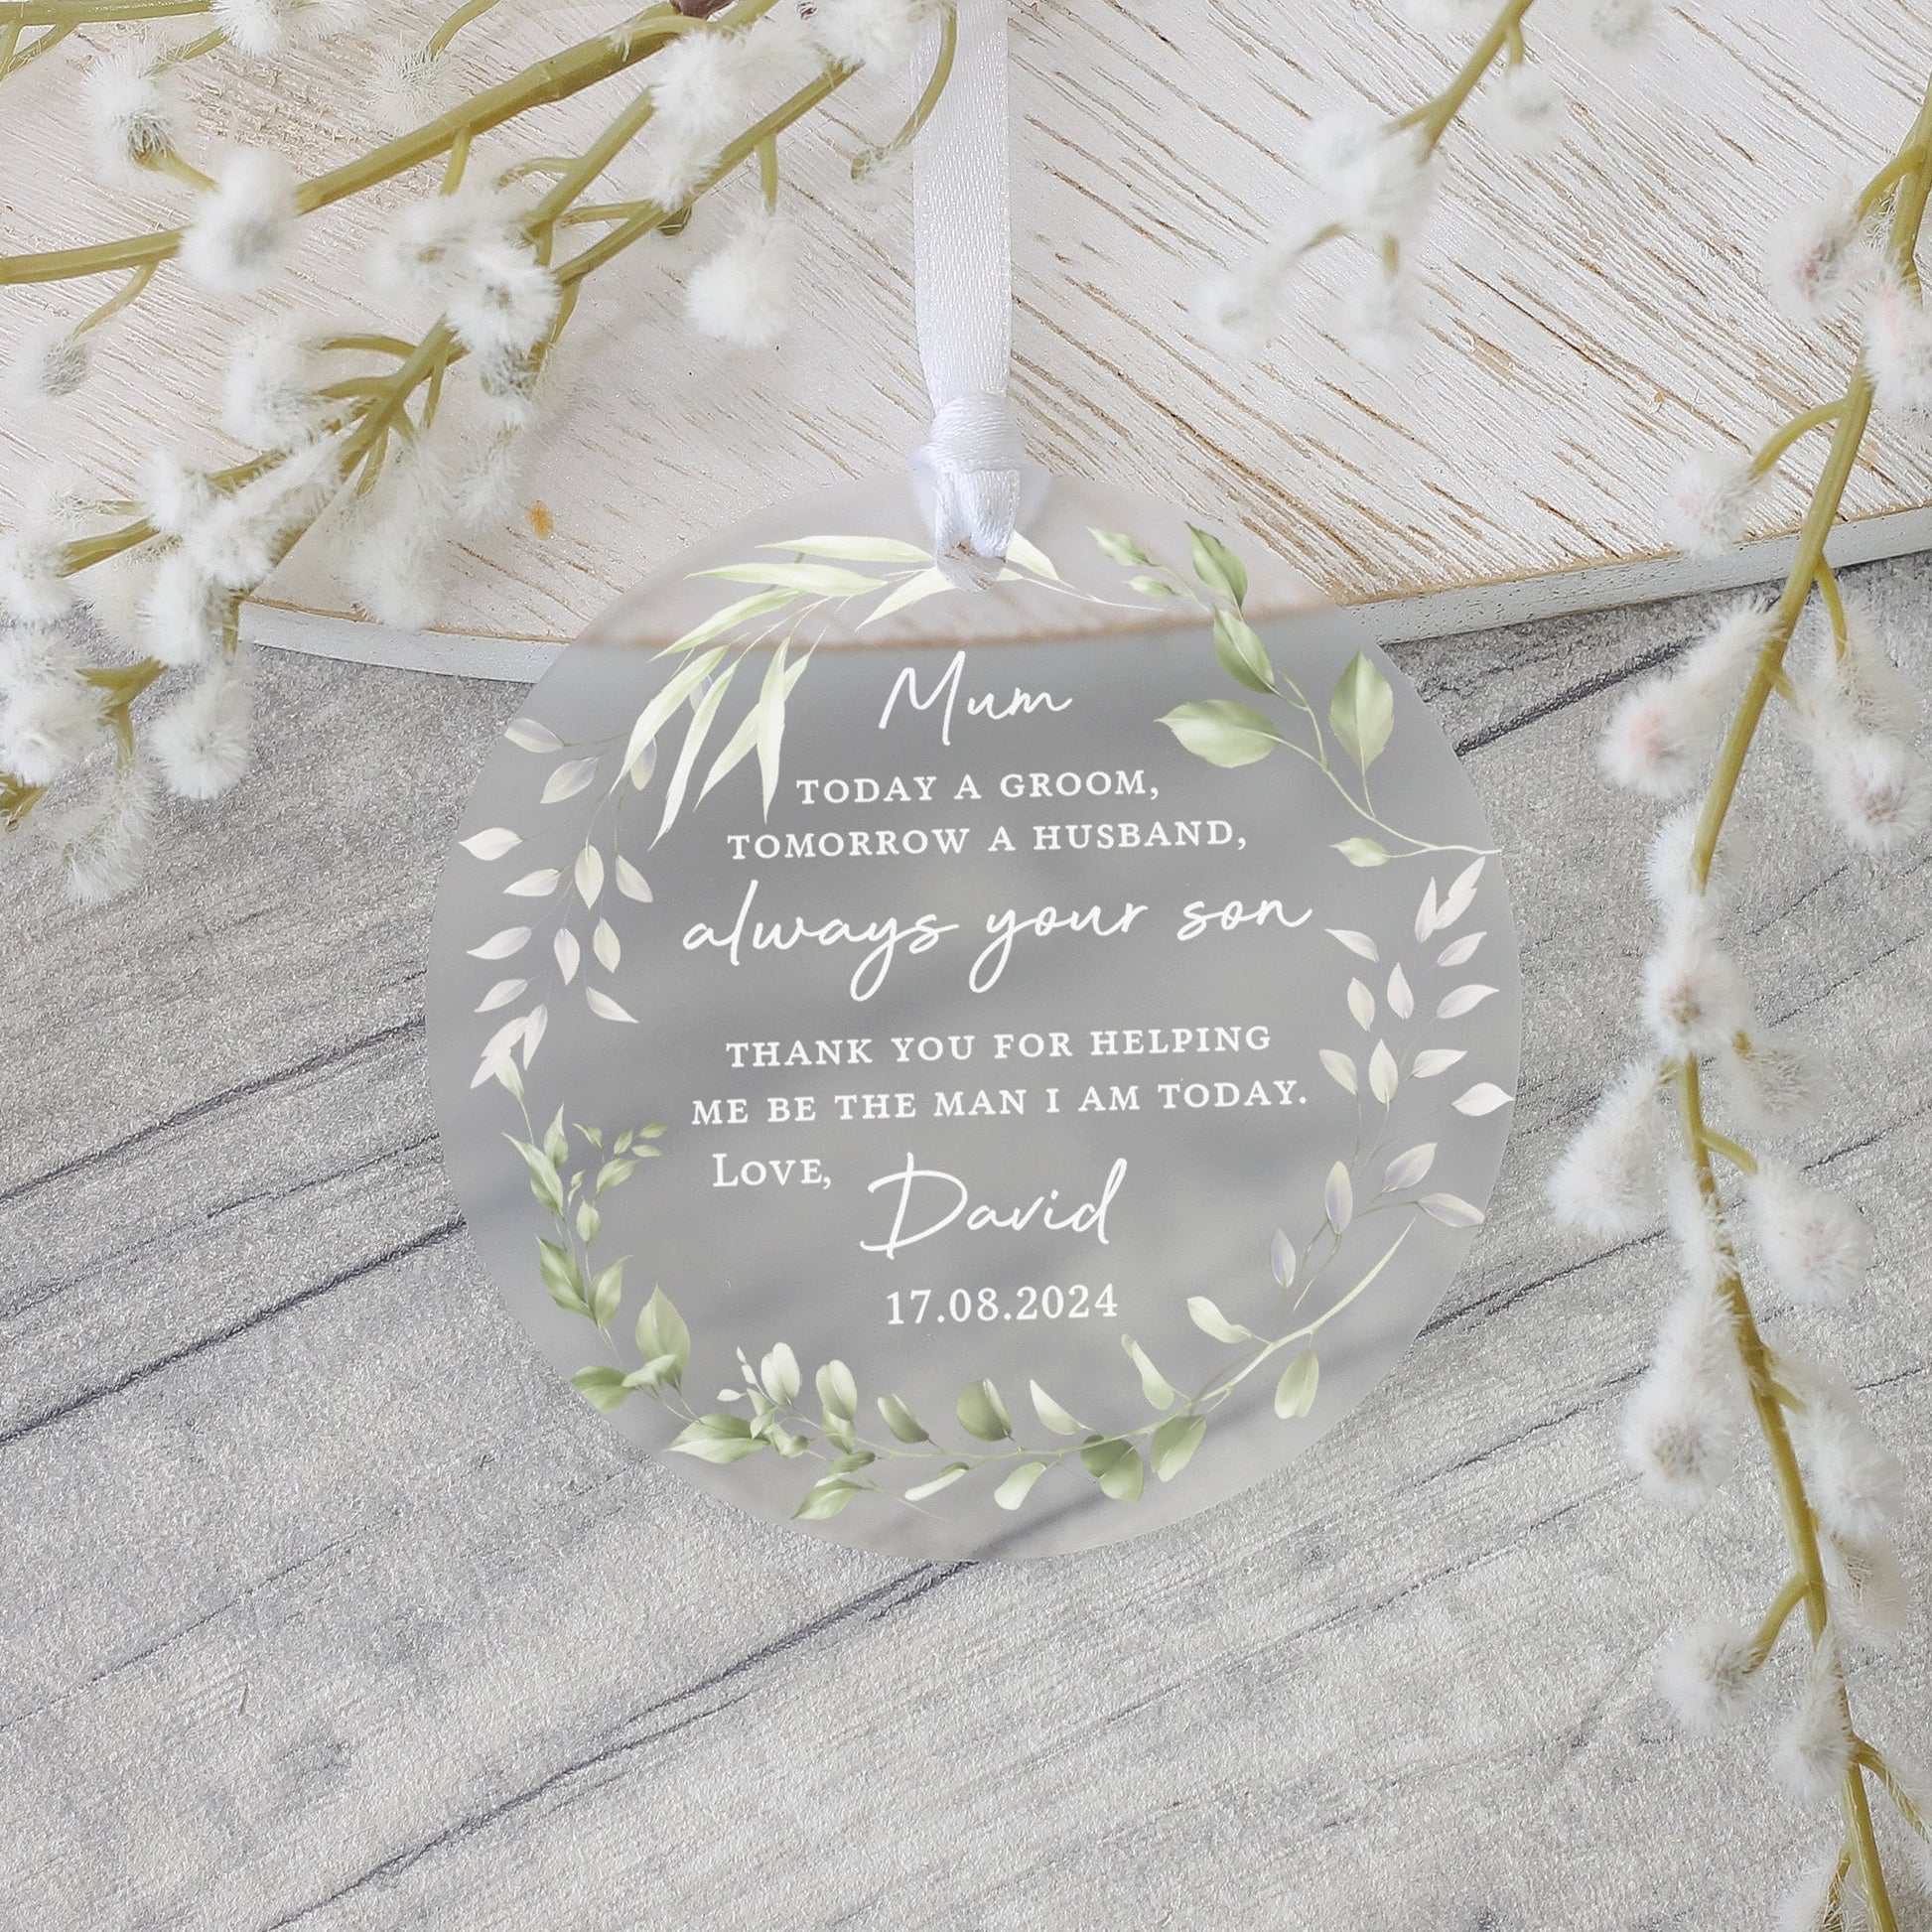 Personalised Mother of the Groom Gift, Groom to Mother, Gifts from Groom, Wedding Day Gifts, Mum of Groom Gifts, Father of Groom Gifts